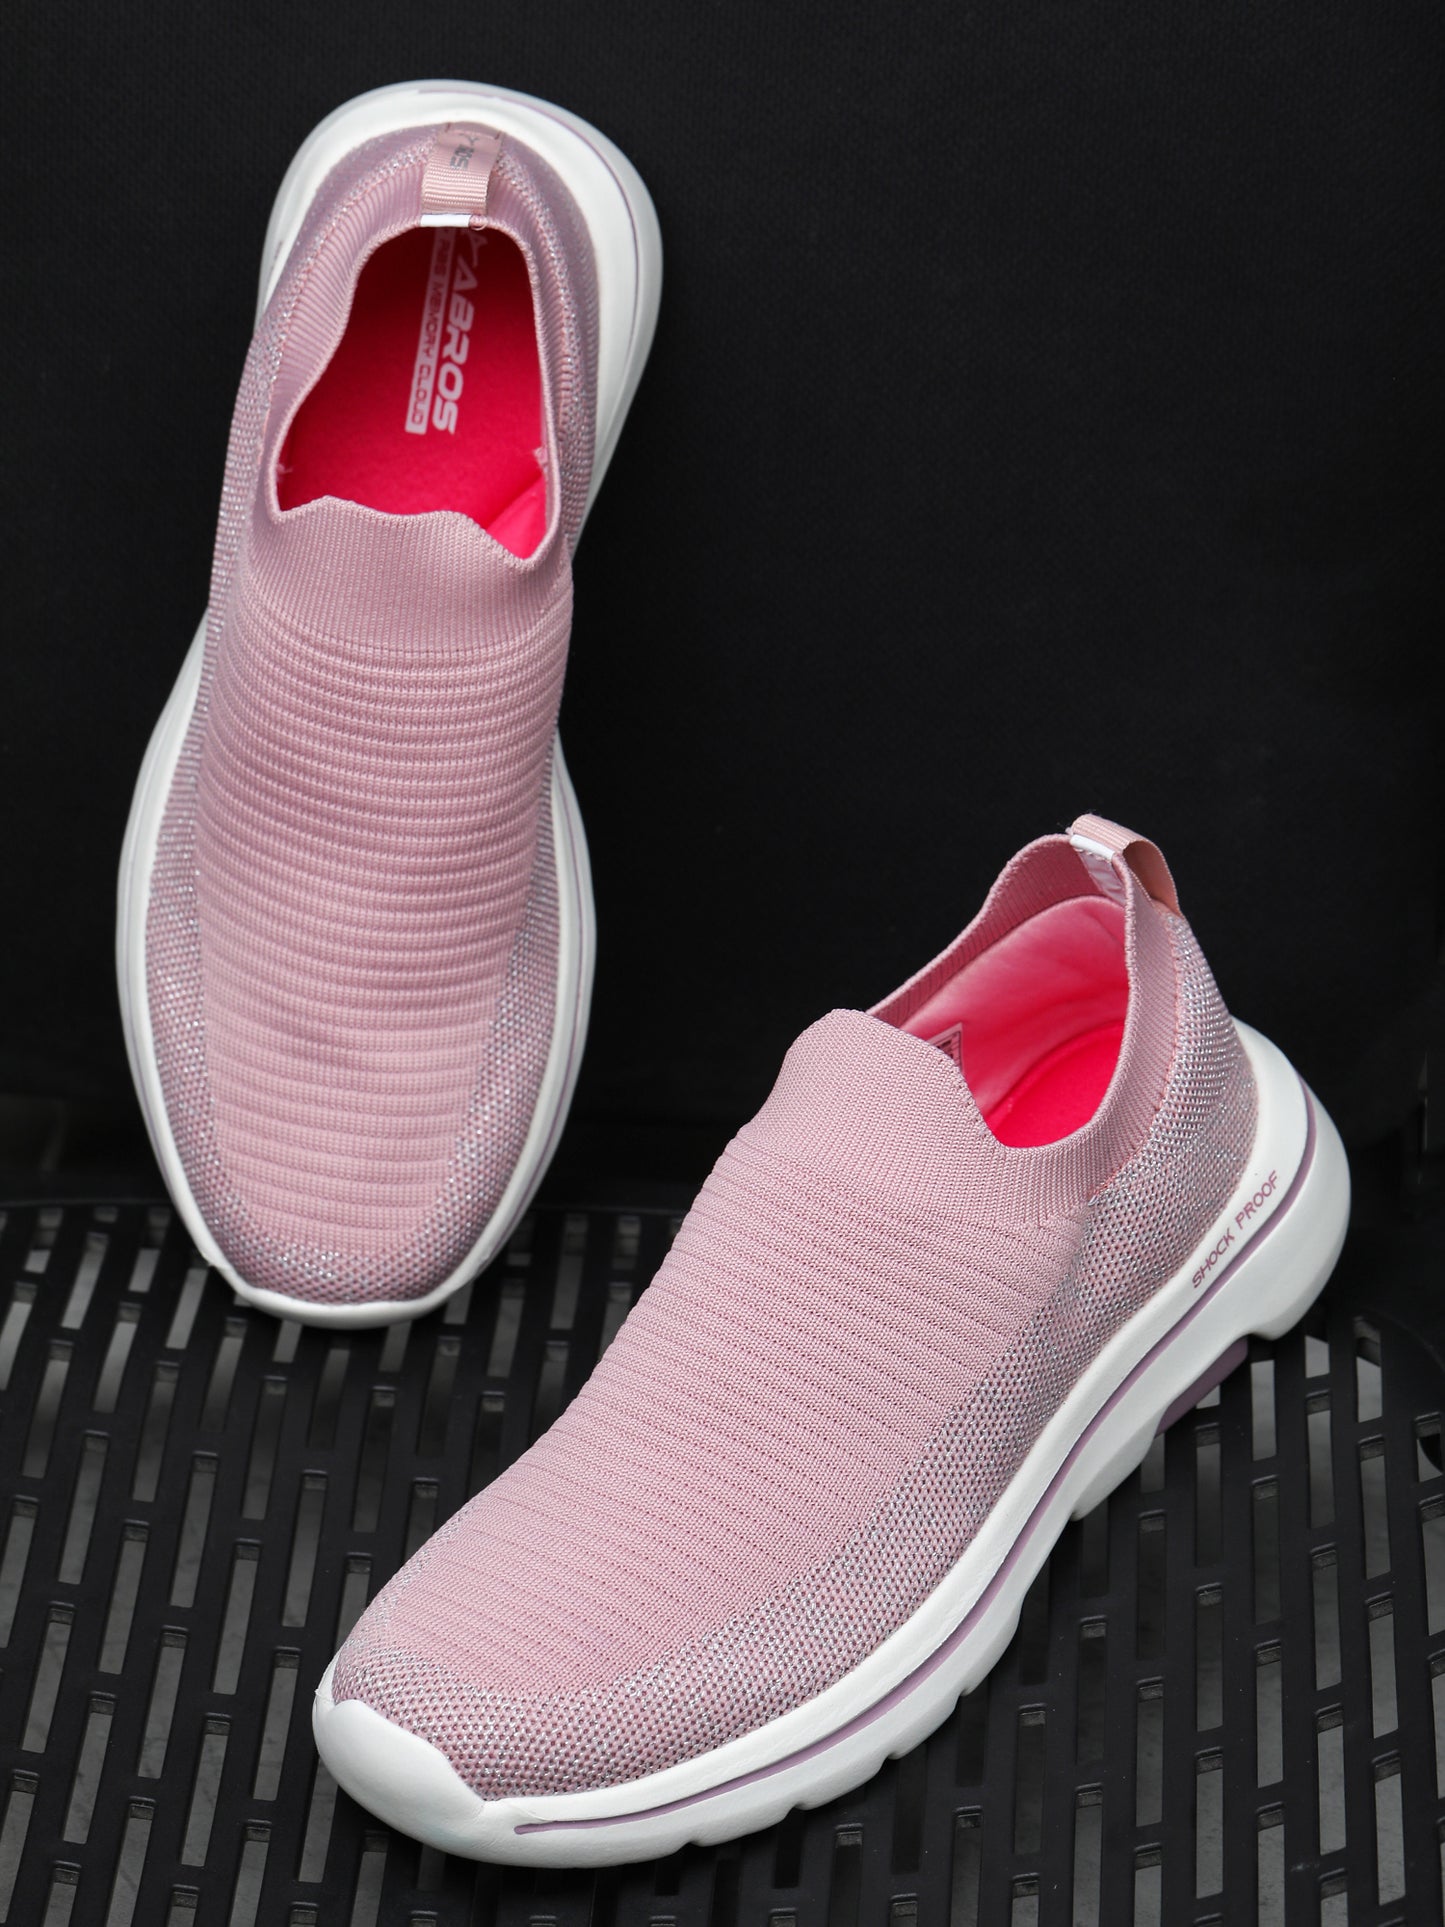 DAISY-N SPORT-SHOES FOR LADIES